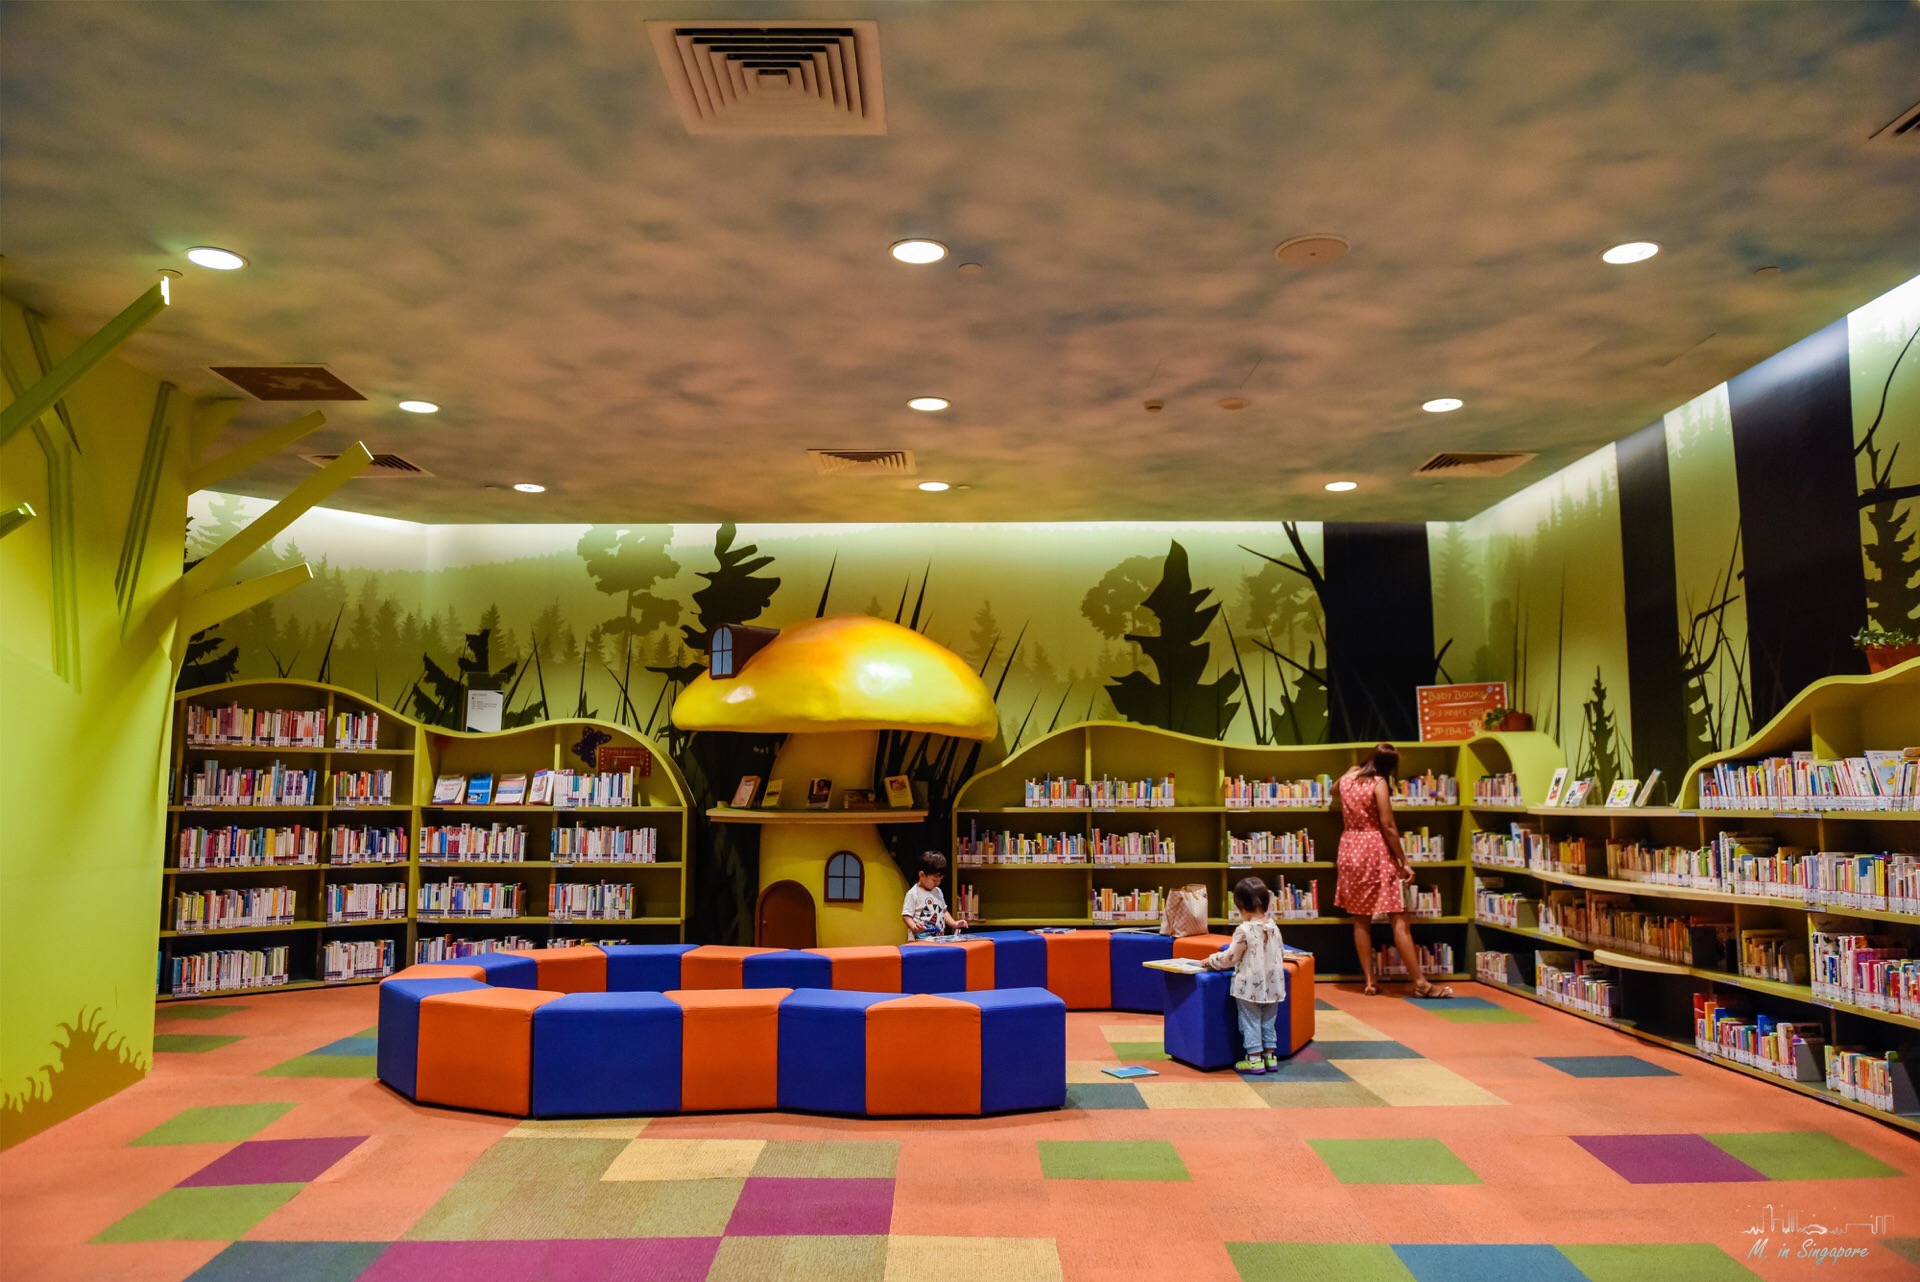 Rotunda Library: Singapore's Grandest Library At National Gallery With ...